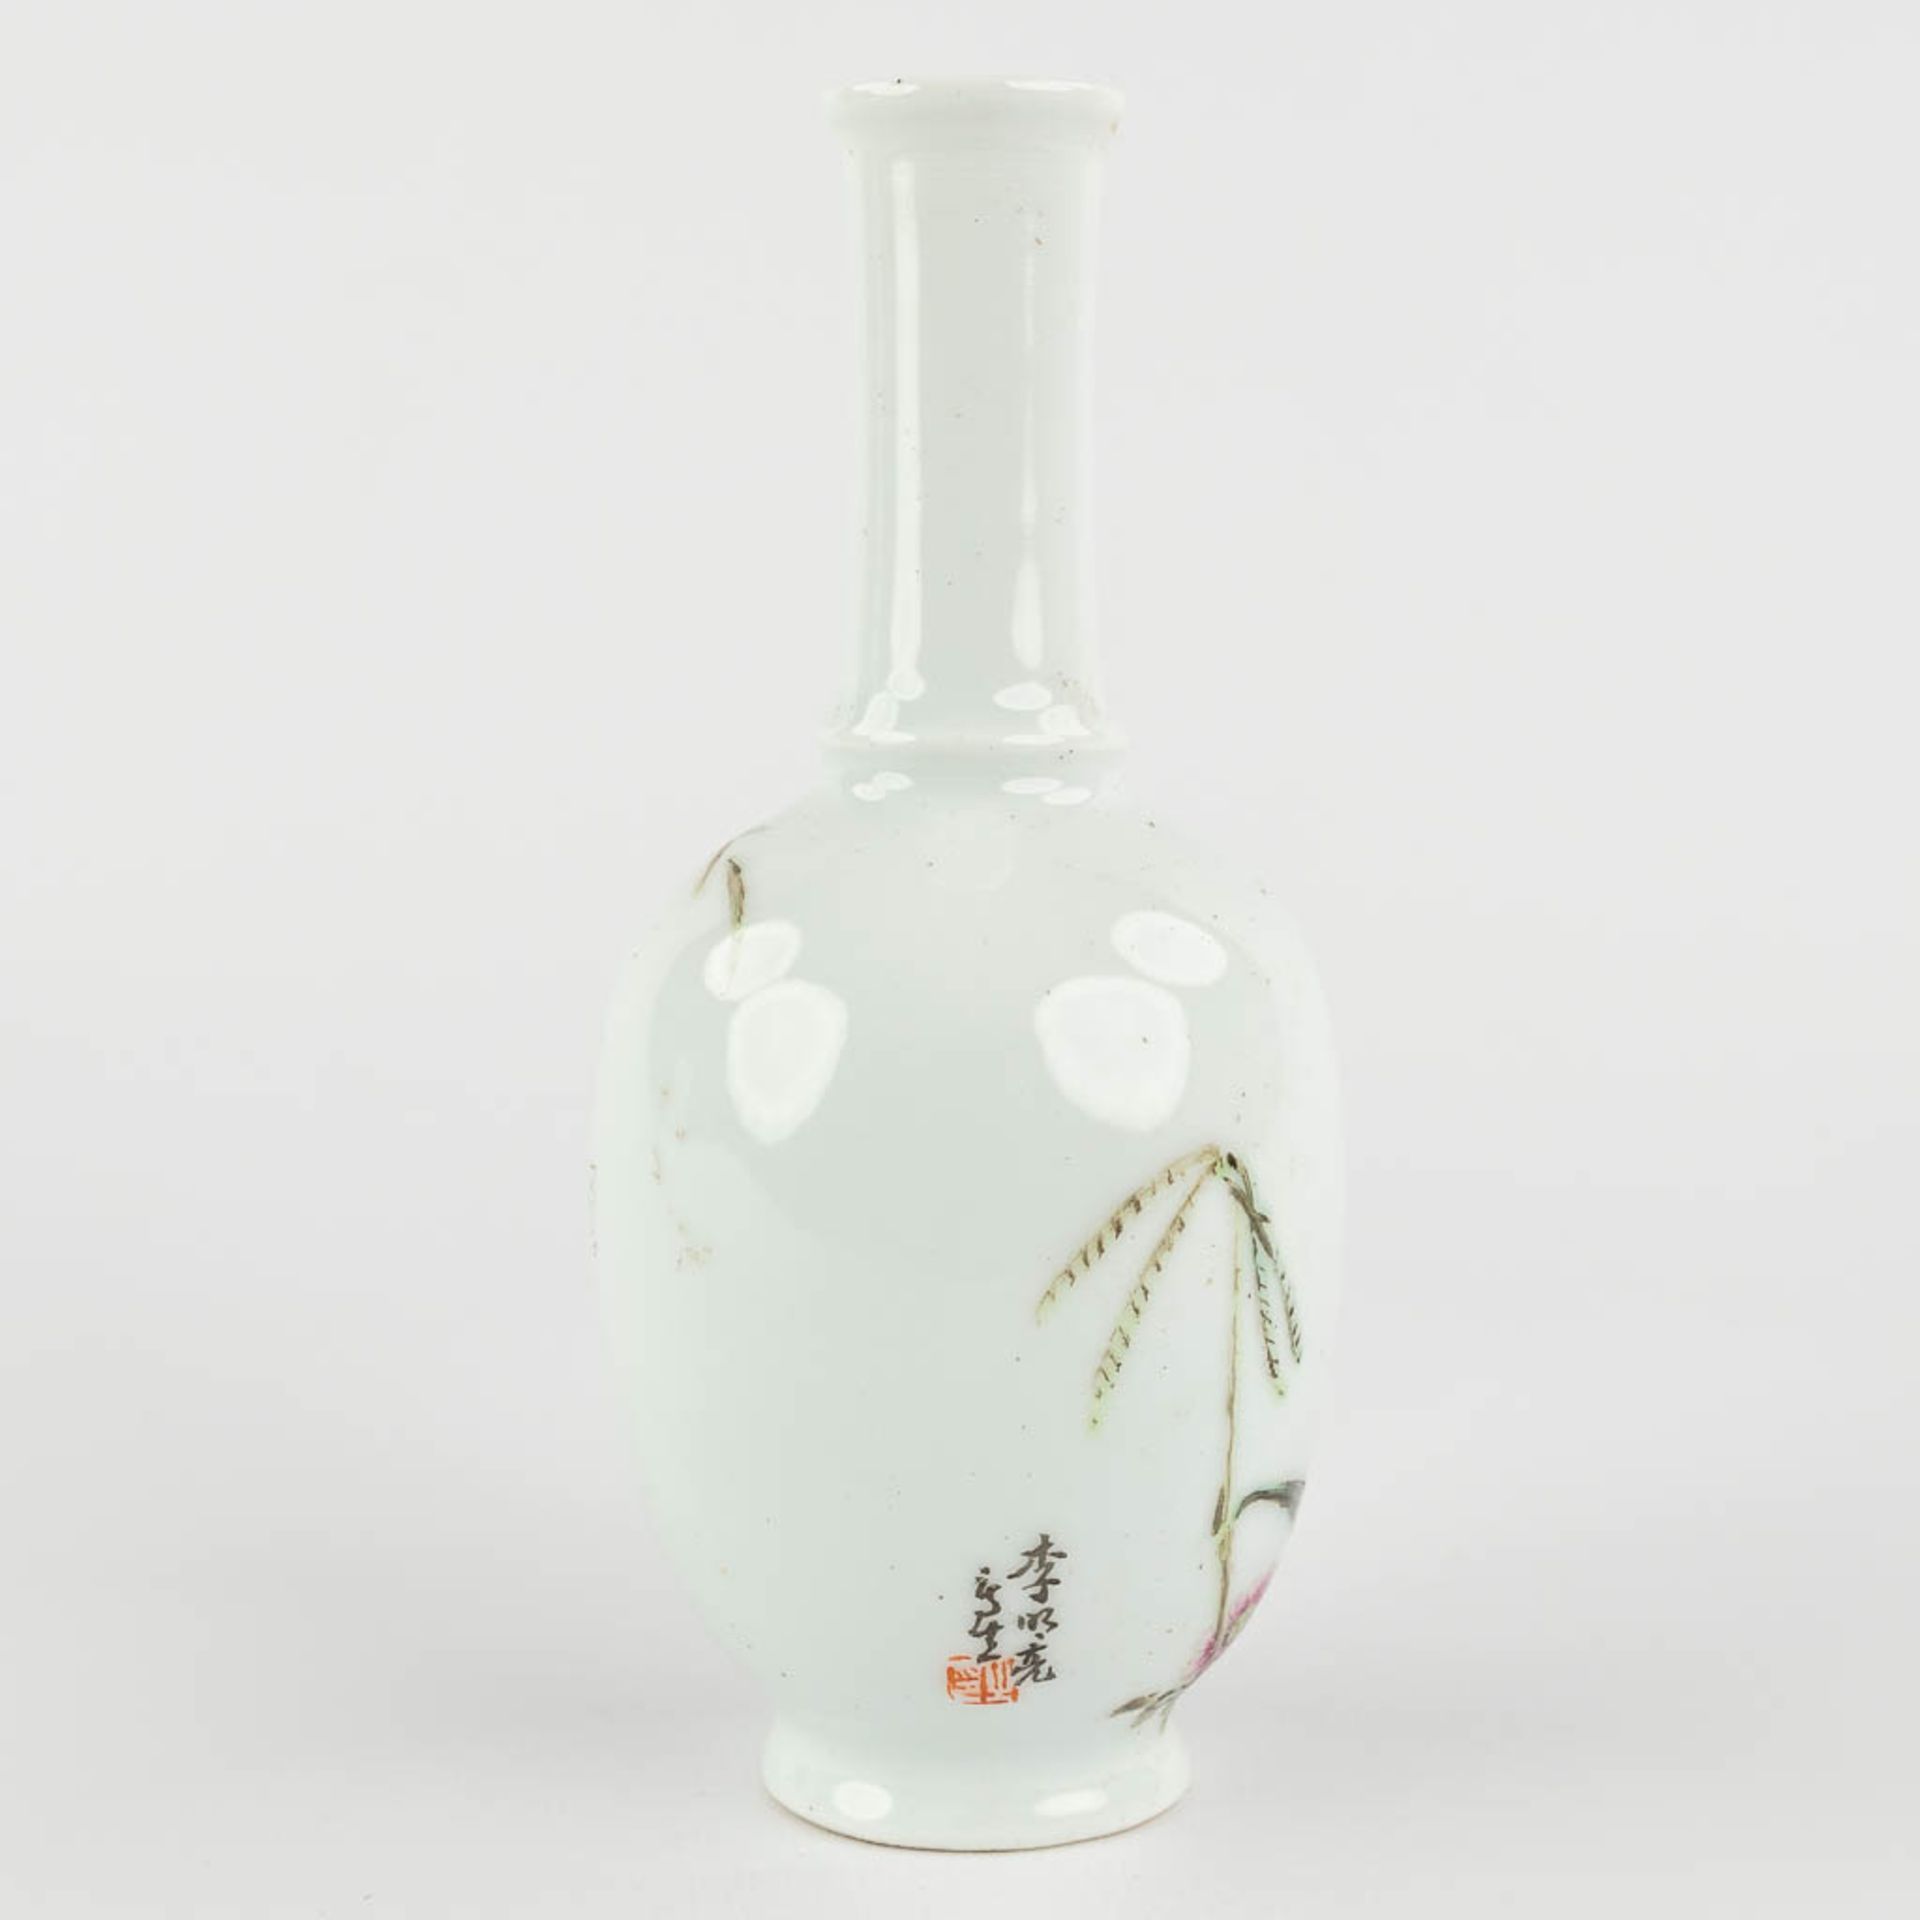 Li mingliang, A Chinese vase with decor of a dragonfly. 20th C. (H:14 x D:6,5 cm) - Bild 5 aus 9